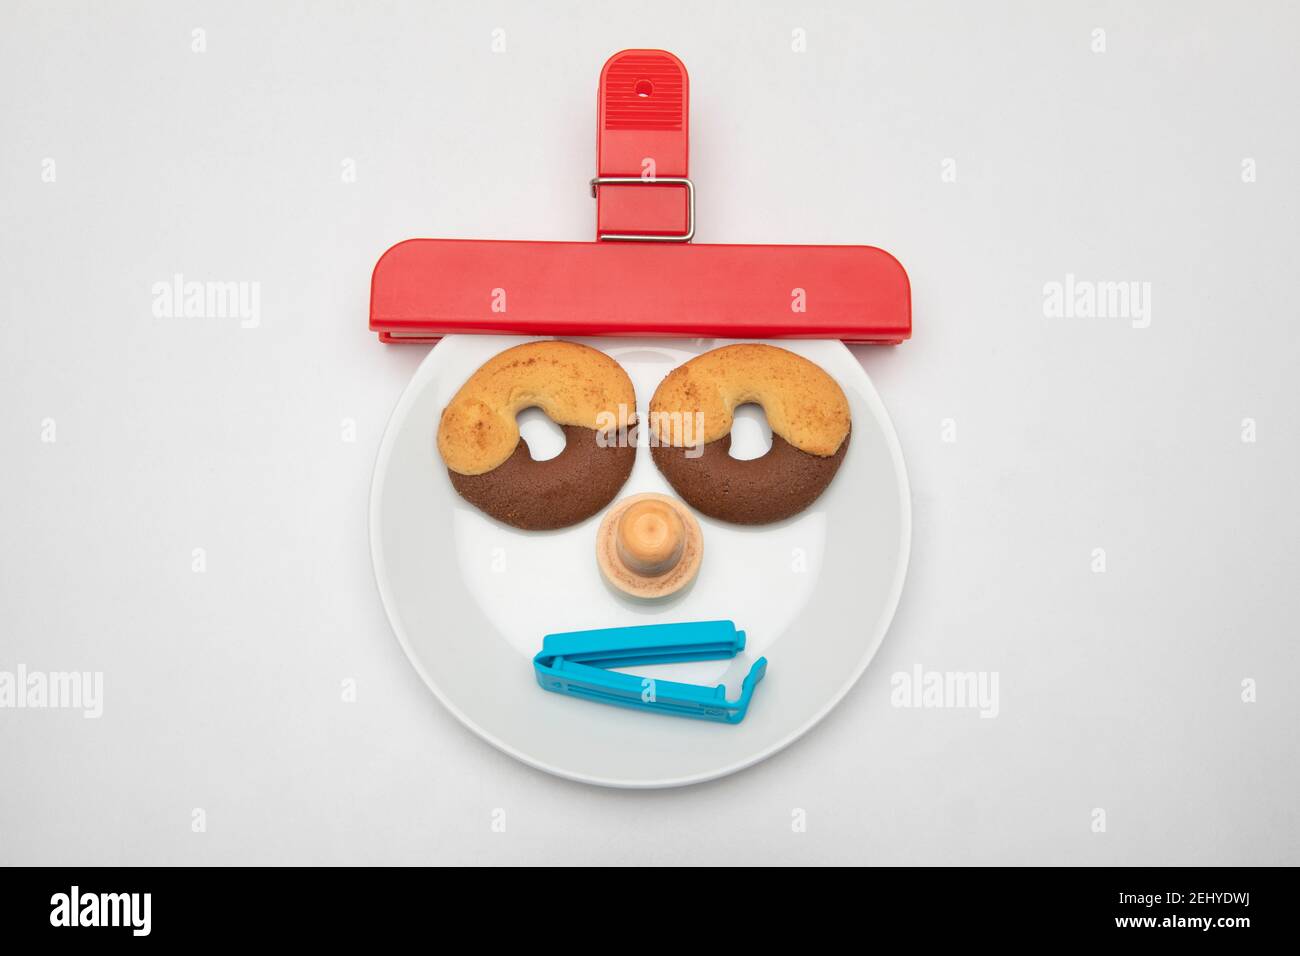 a face made of biscuits on a plate with bag closure clips Stock Photo